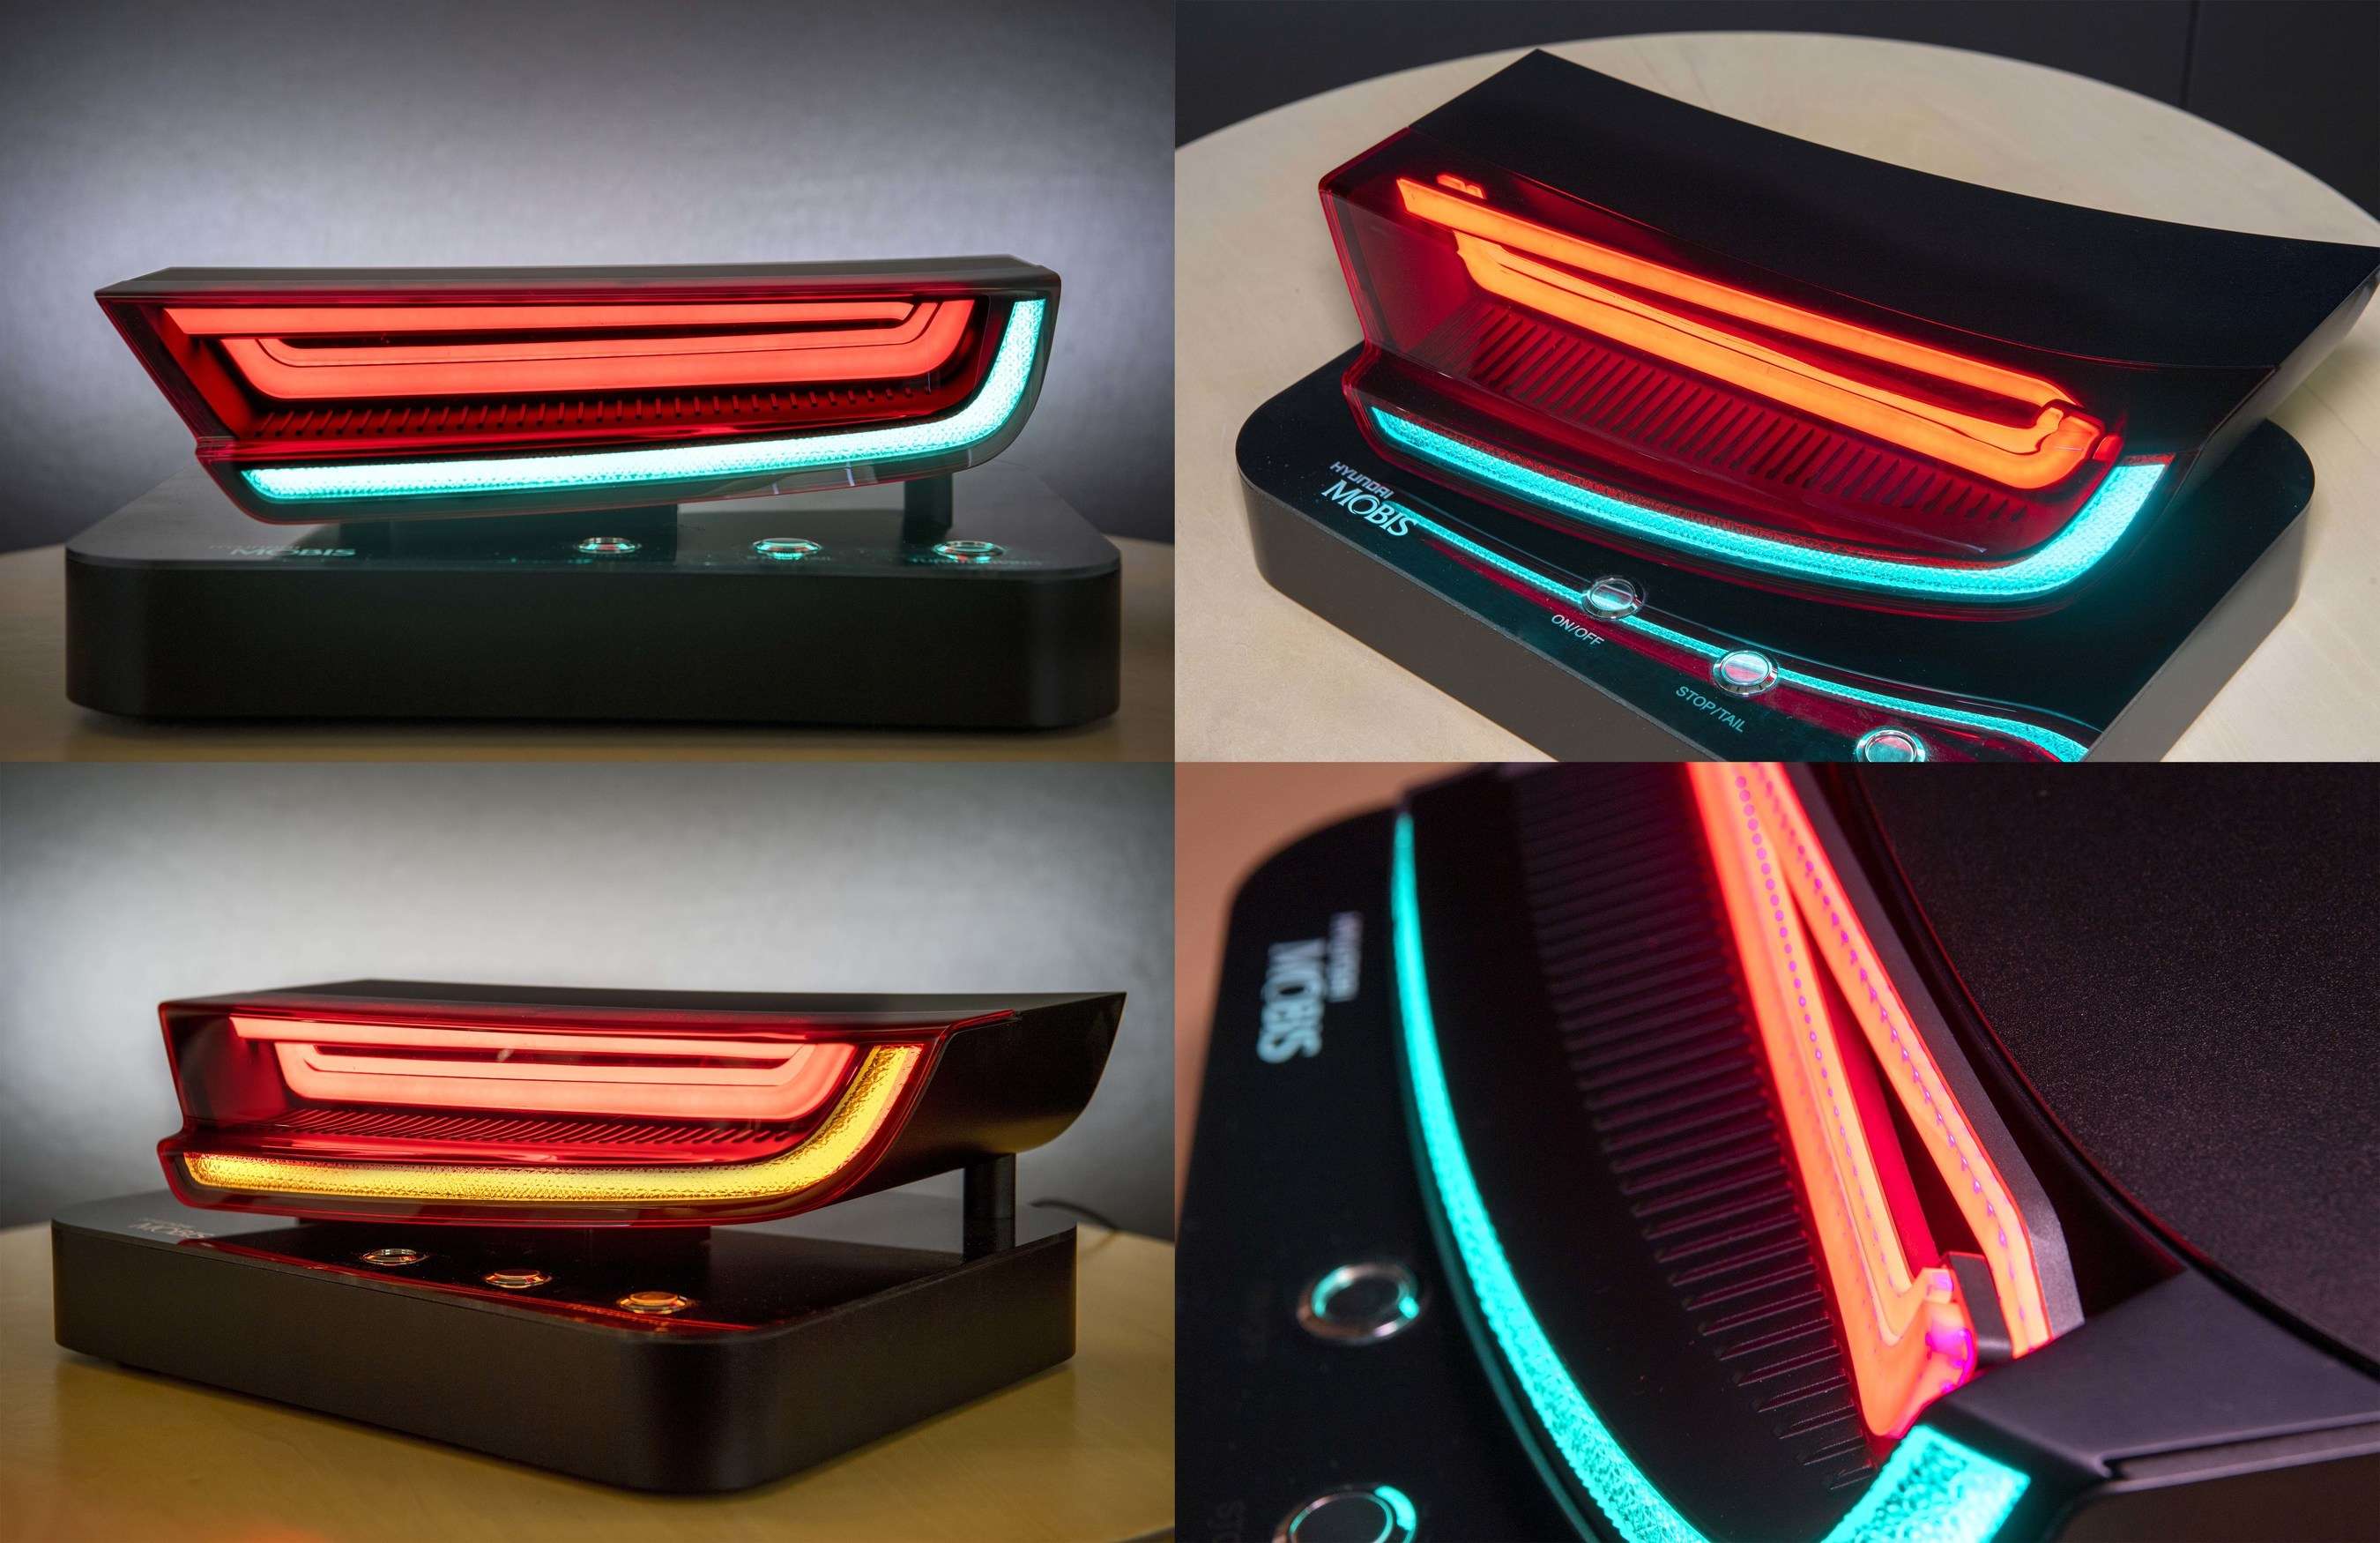 The ‘lighting grille’ can be used as a means of communicating with other vehicles or pedestrians and it can also create strong and unique design effects, depending on how the lighting patterns are applied.